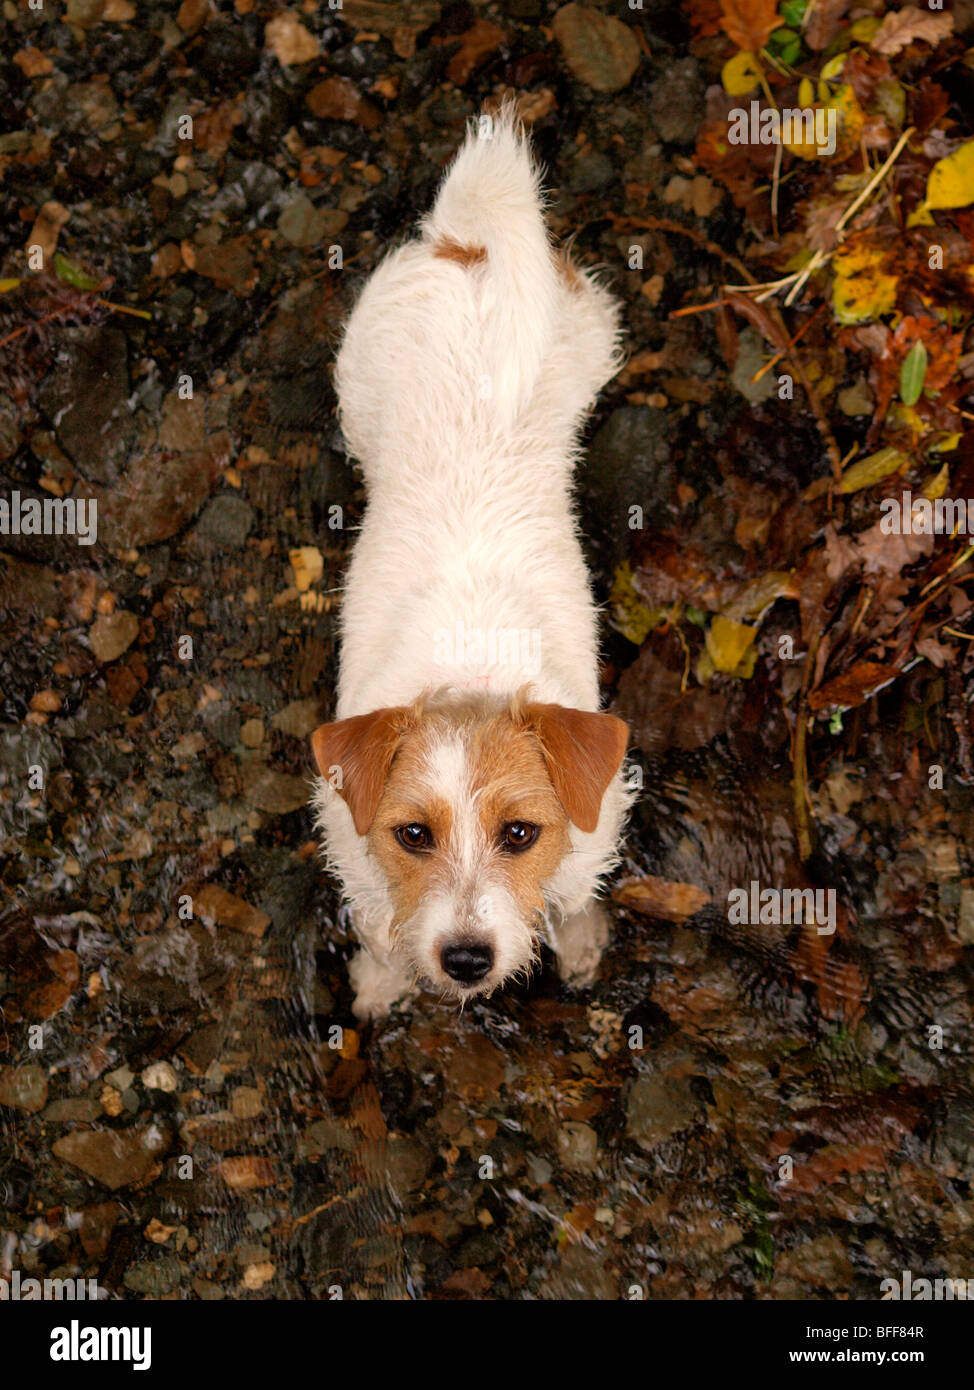 Small dog looking up Stock Photo